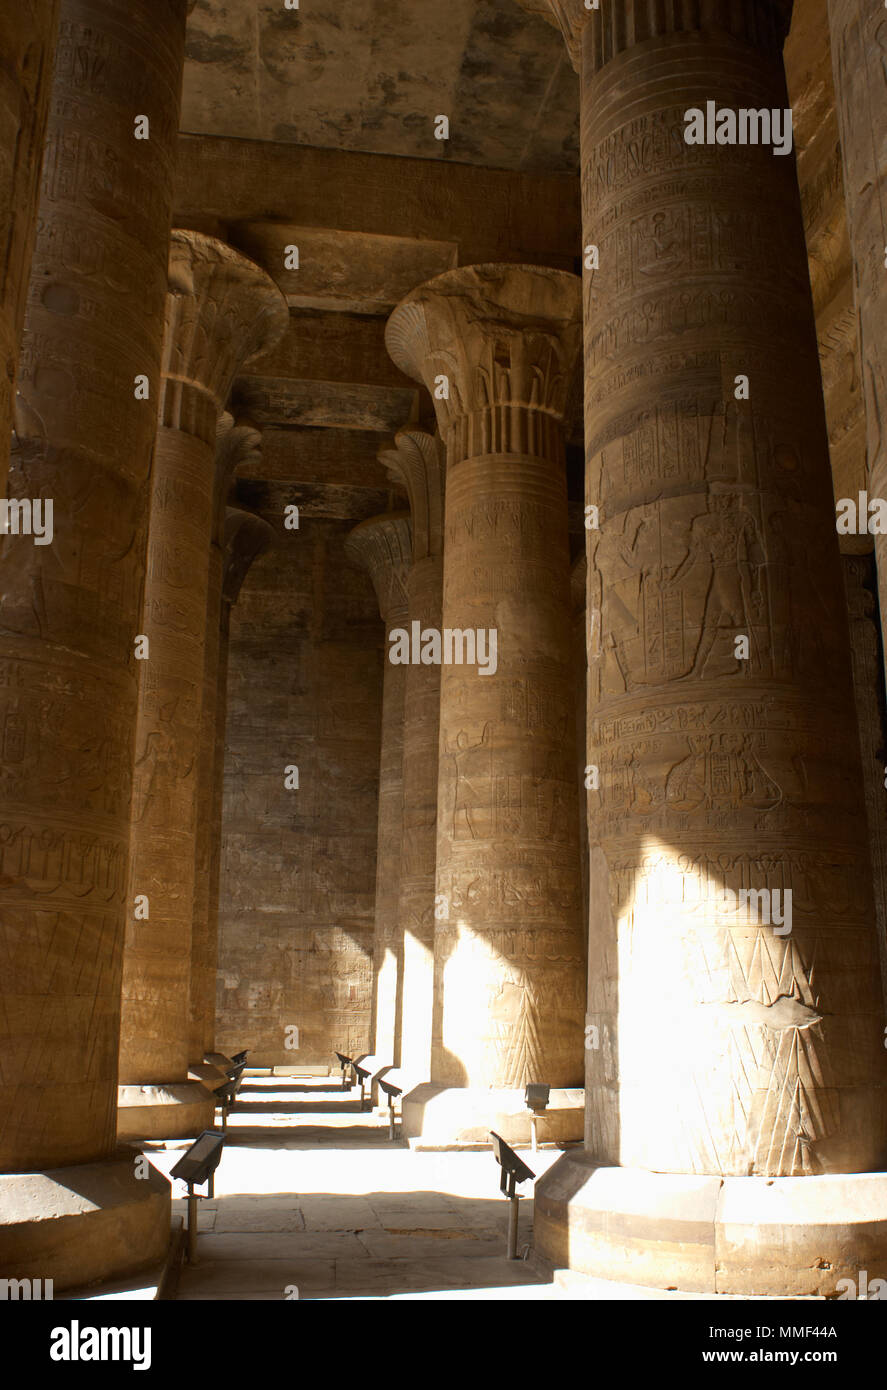 Egypt. Temple of Edfu. Ancient temple dedicated to Horus. Ptolemaic period. It was built during the reign of Ptolemy III and Ptolemy XII, 237-57 BC. First Hypostyle Hall. Columns. Stock Photo